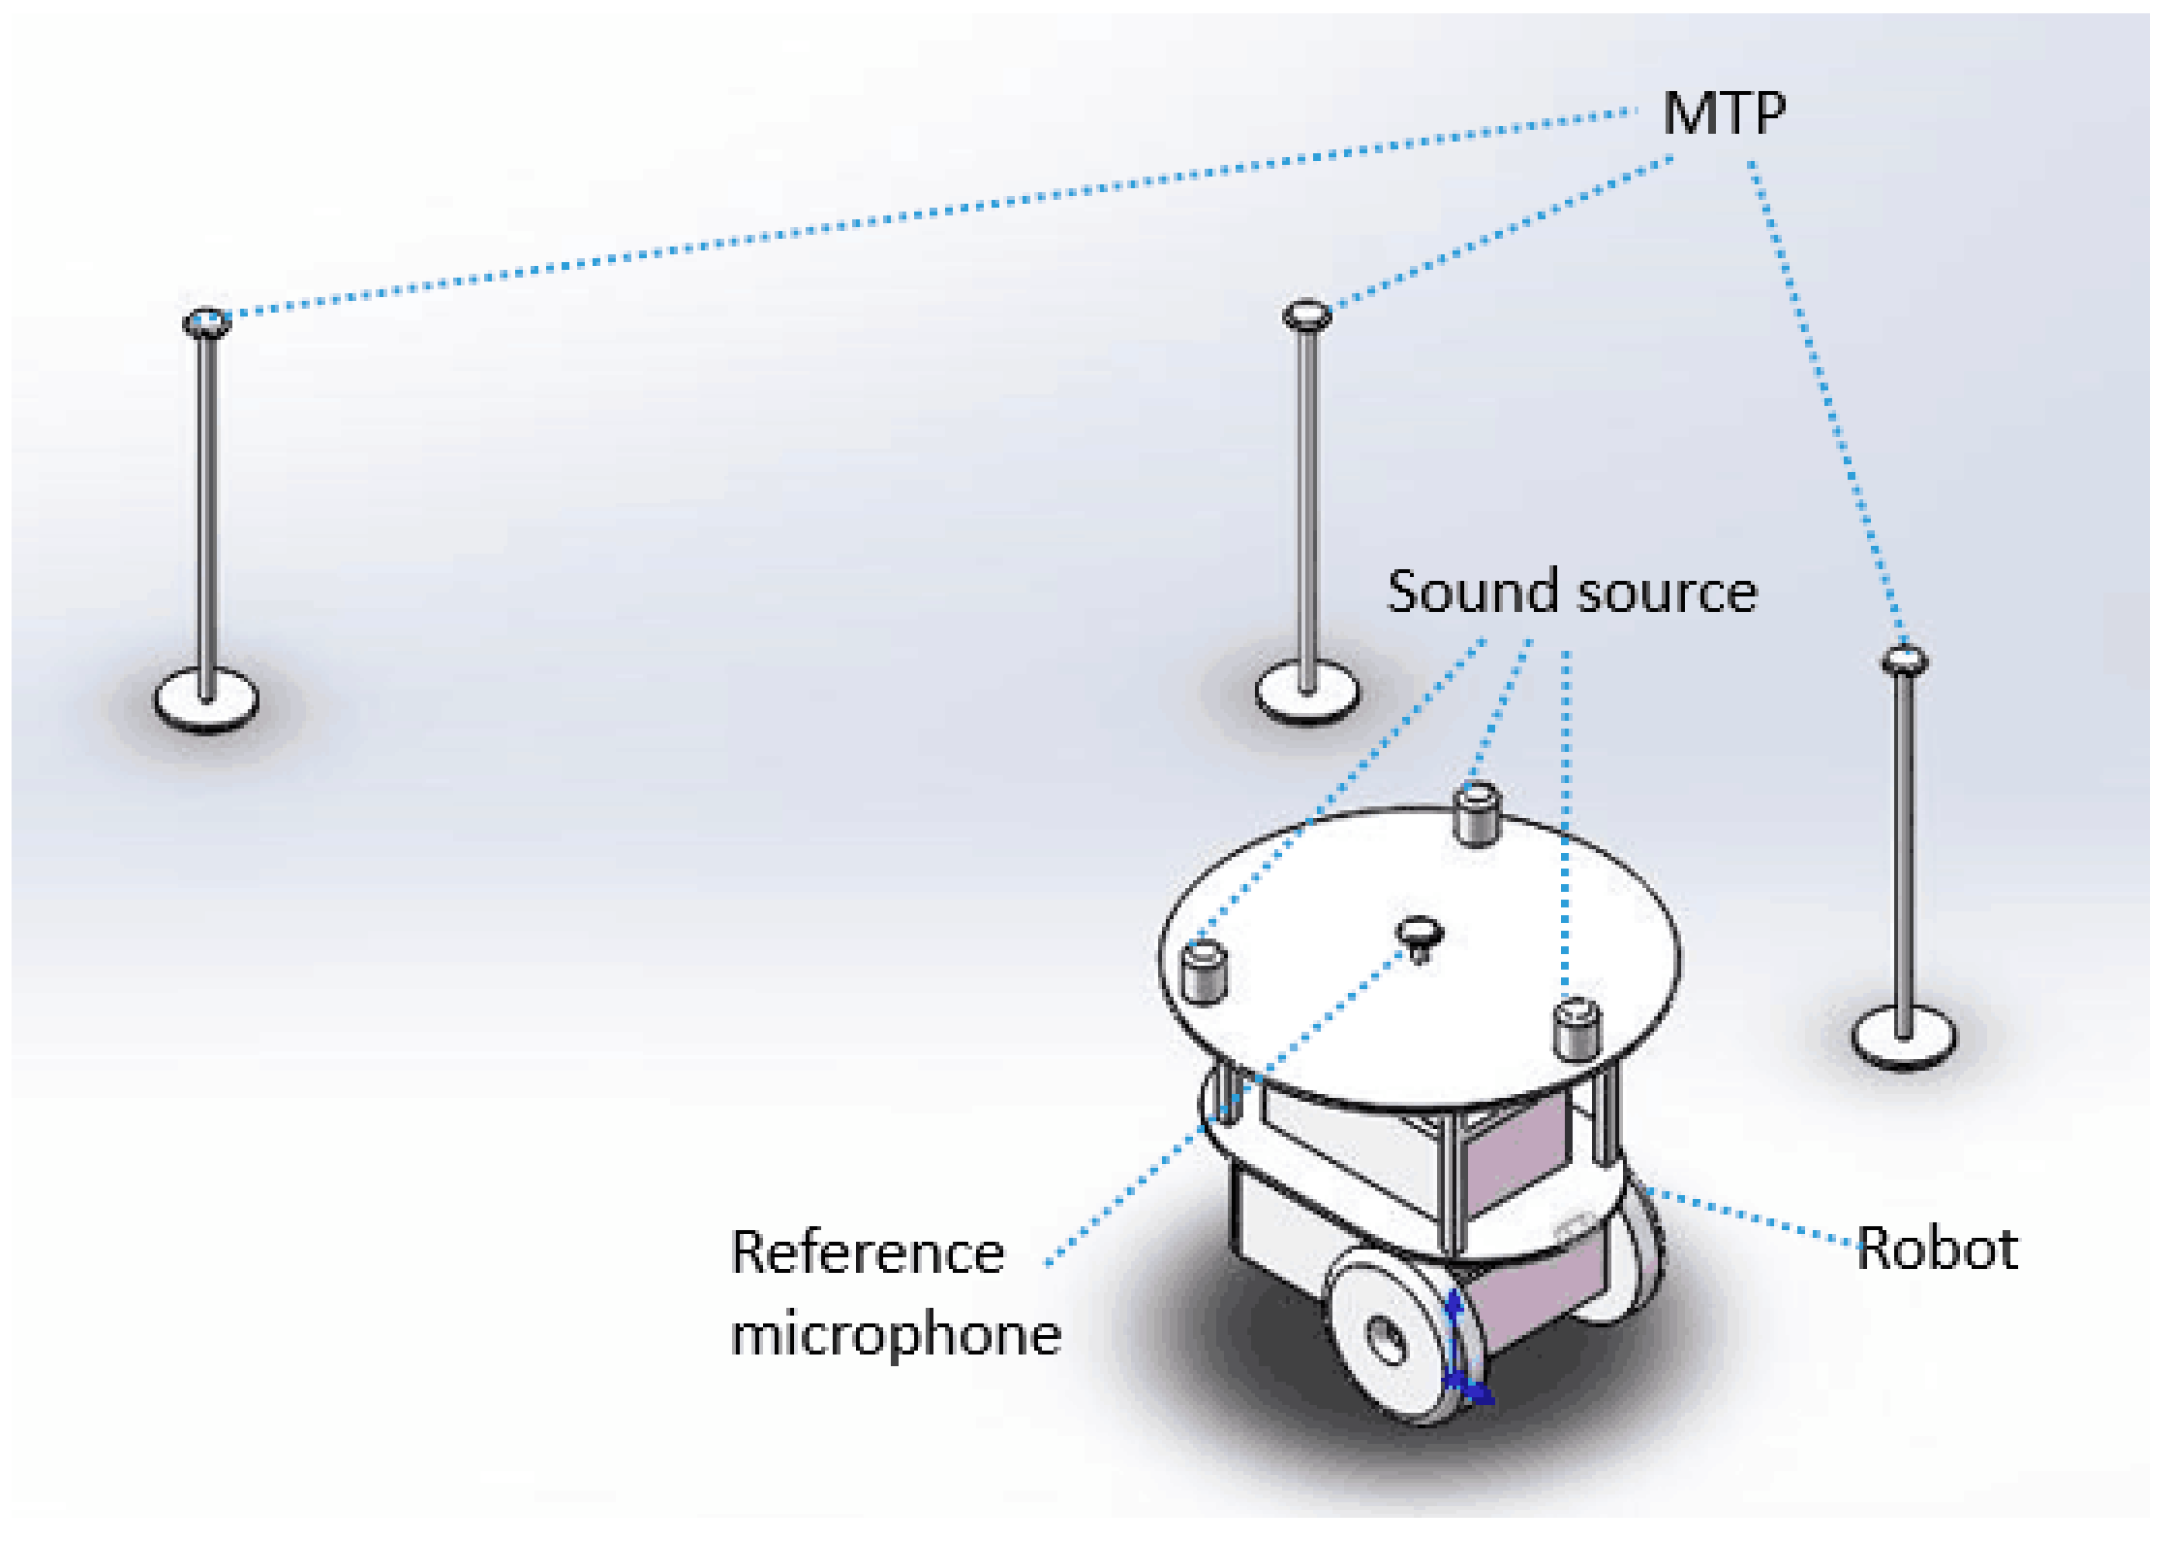 belastning Støv ventilation Applied Sciences | Free Full-Text | A New Method of Simultaneous  Localization and Mapping for Mobile Robots Using Acoustic Landmarks